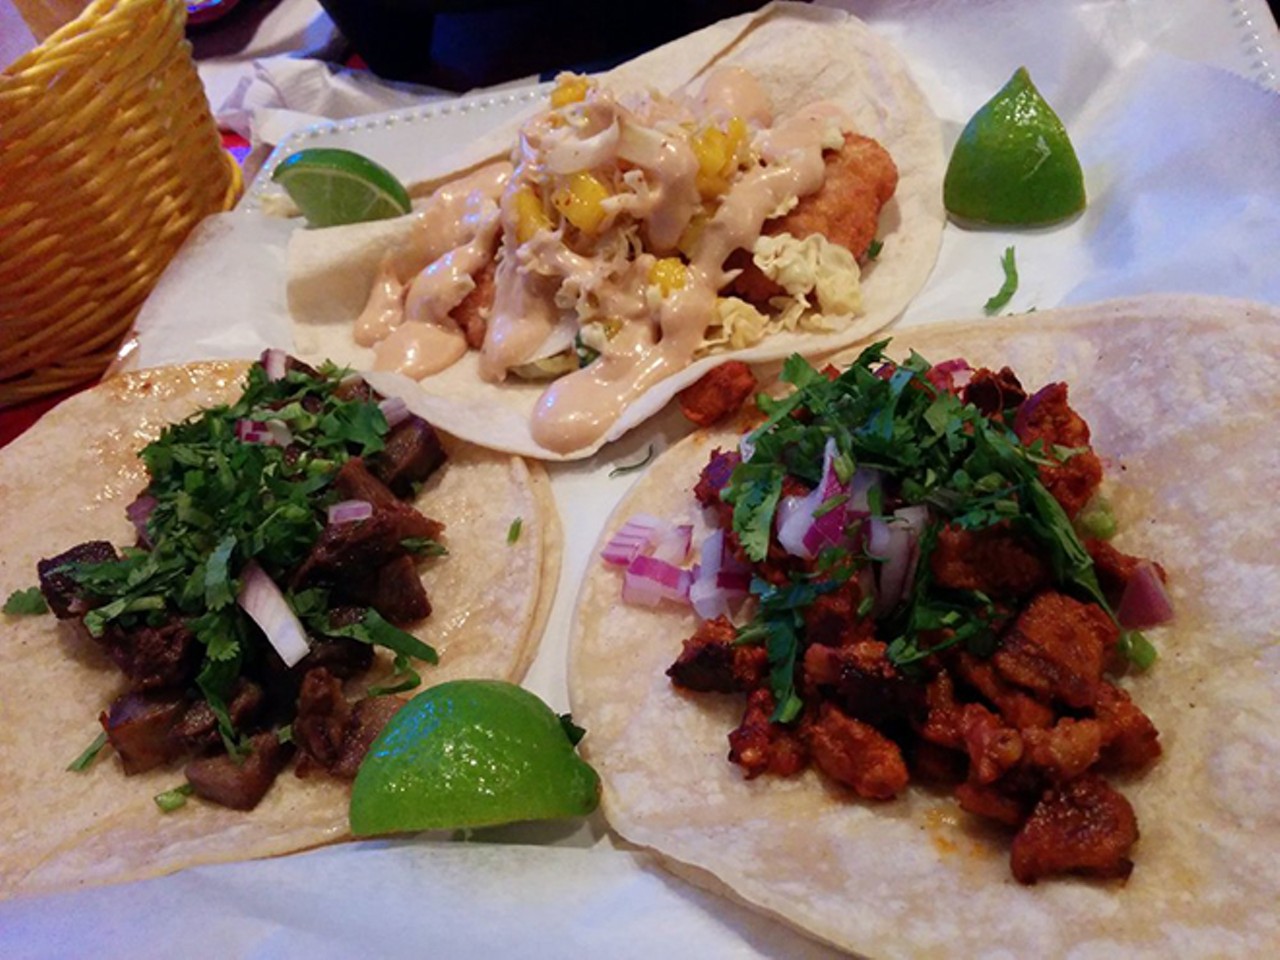 Don Julio Mexican Grill & Tequila Bar
551 S. Chickasaw Trail, 407-930-3735
The taco trio: fish, lengua and al pastor. Have a drink at the in-house bar to slake your thirst after a bite of these multicultural taco treats.
Photo via Yelp